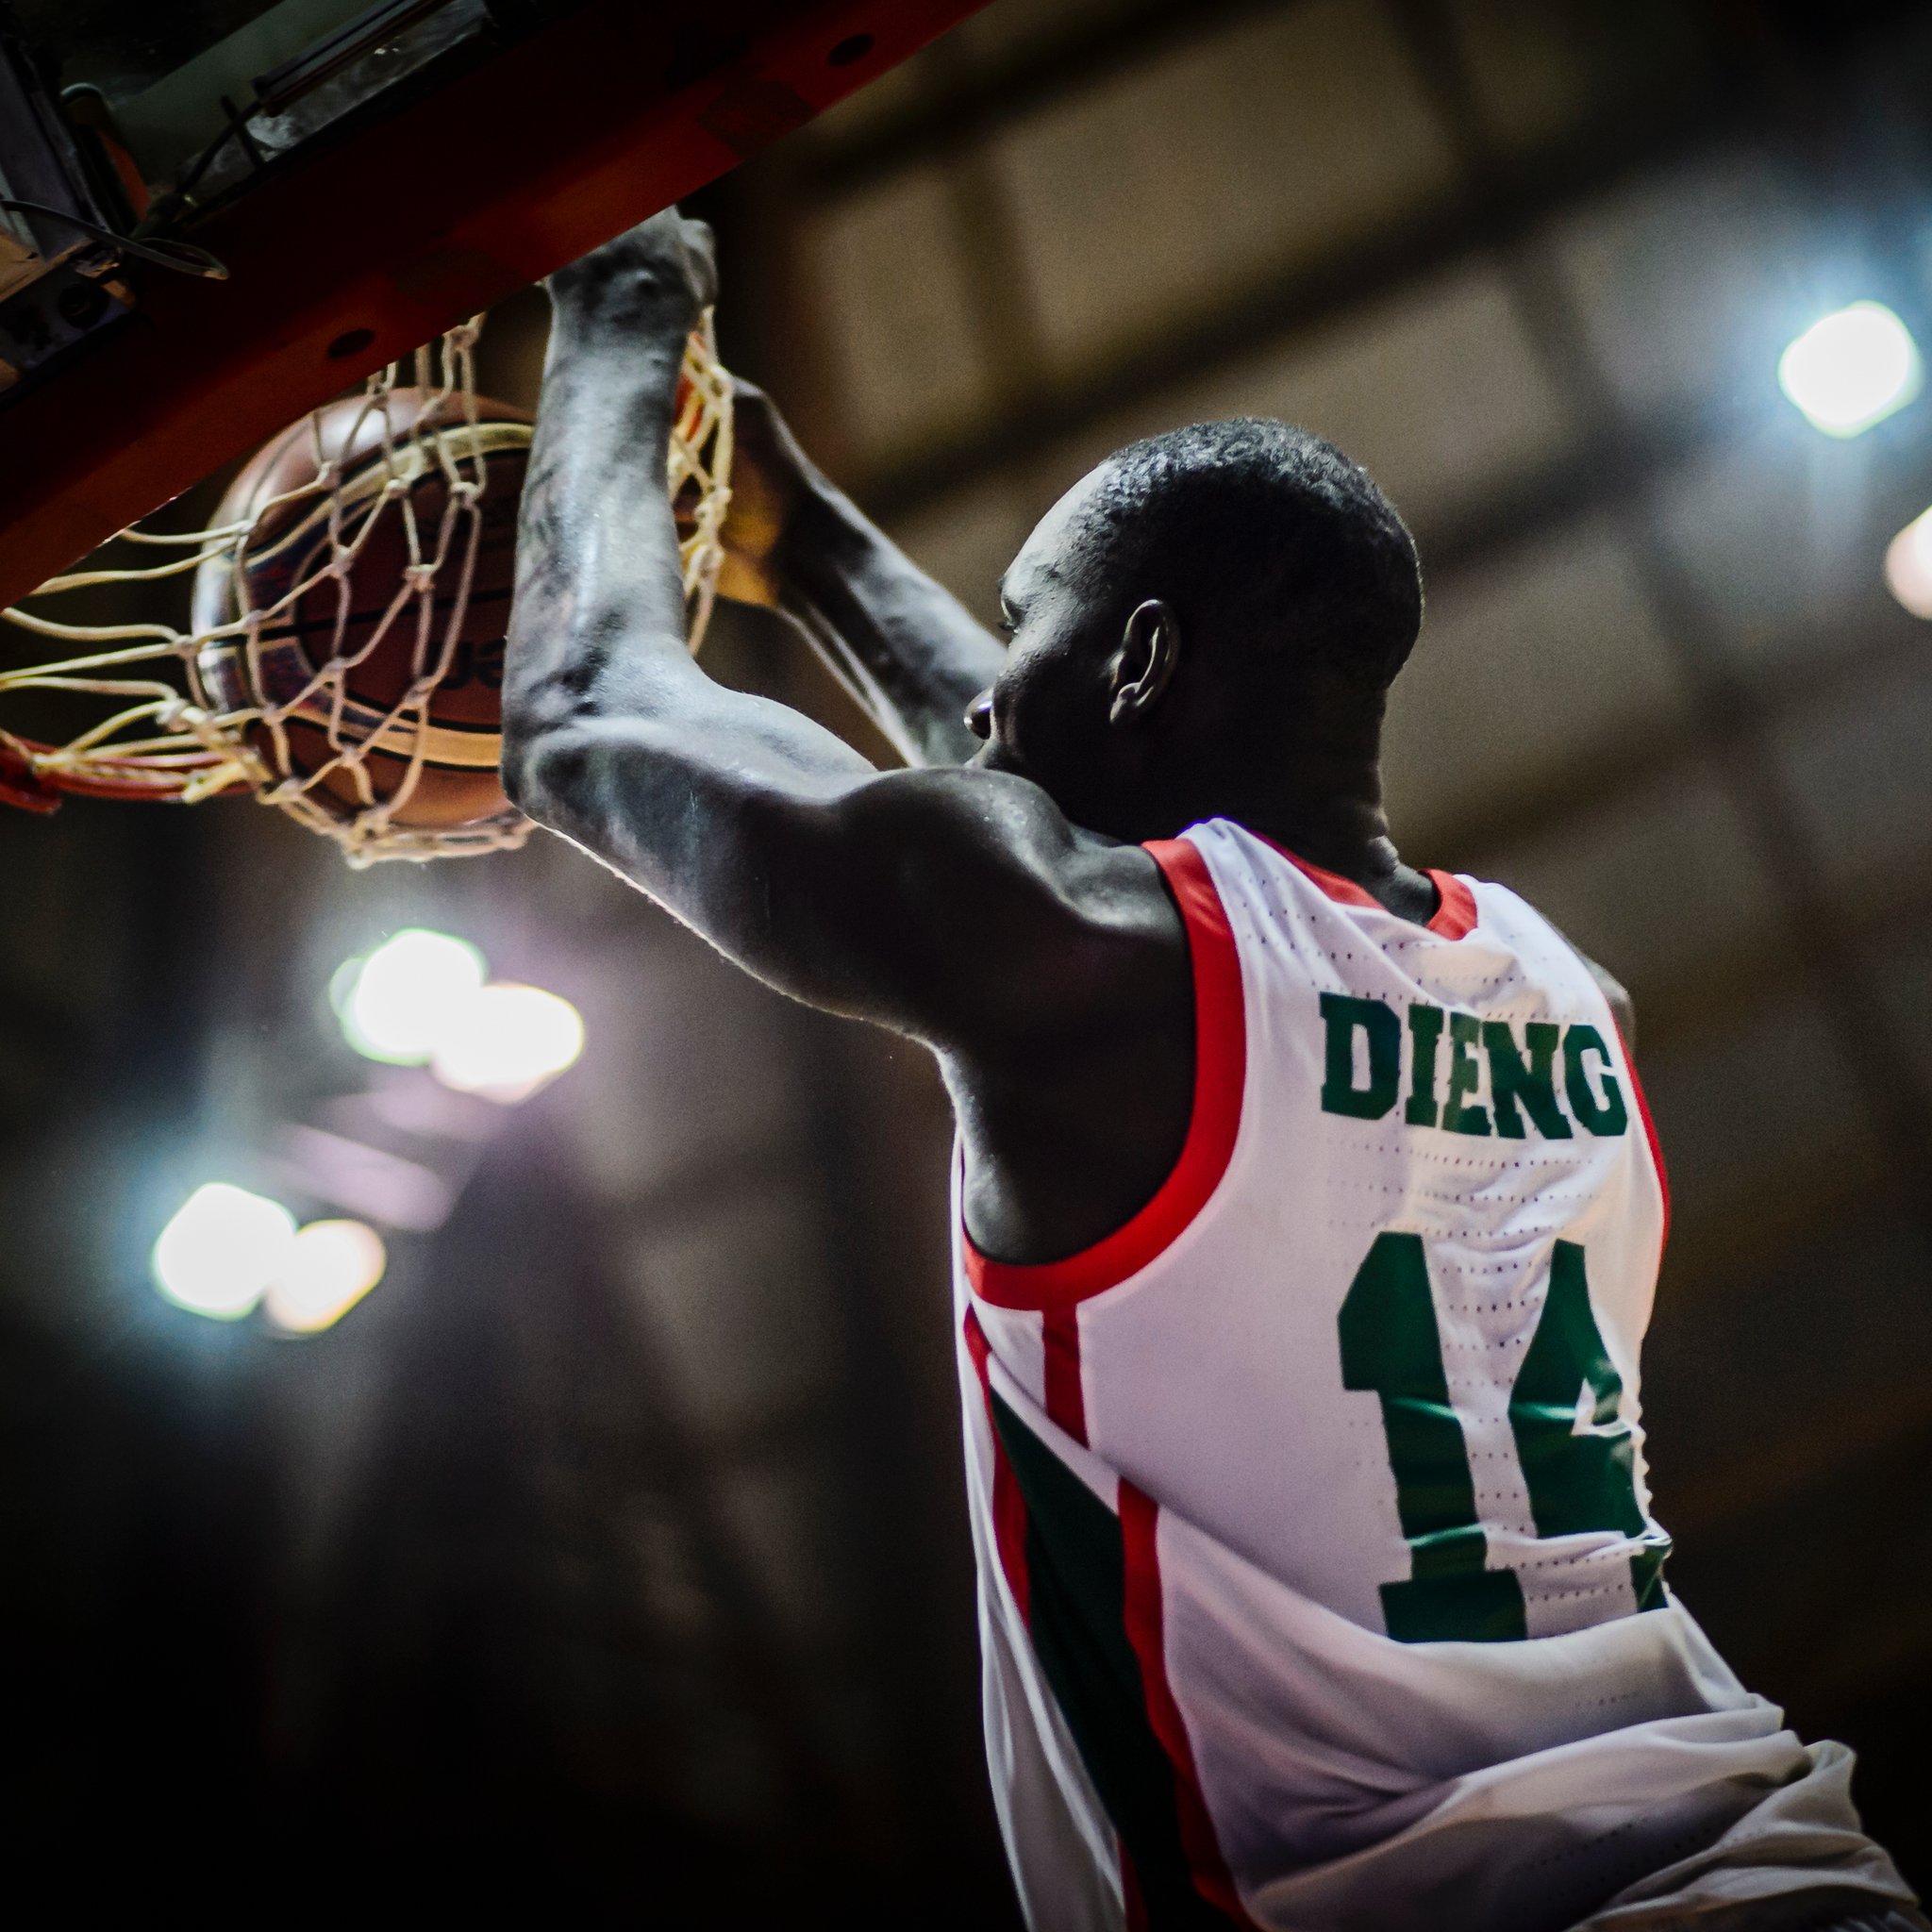 Greatest Senegalese  player ever? Happy birthday to Gorgui Dieng, who turns 33 today!  